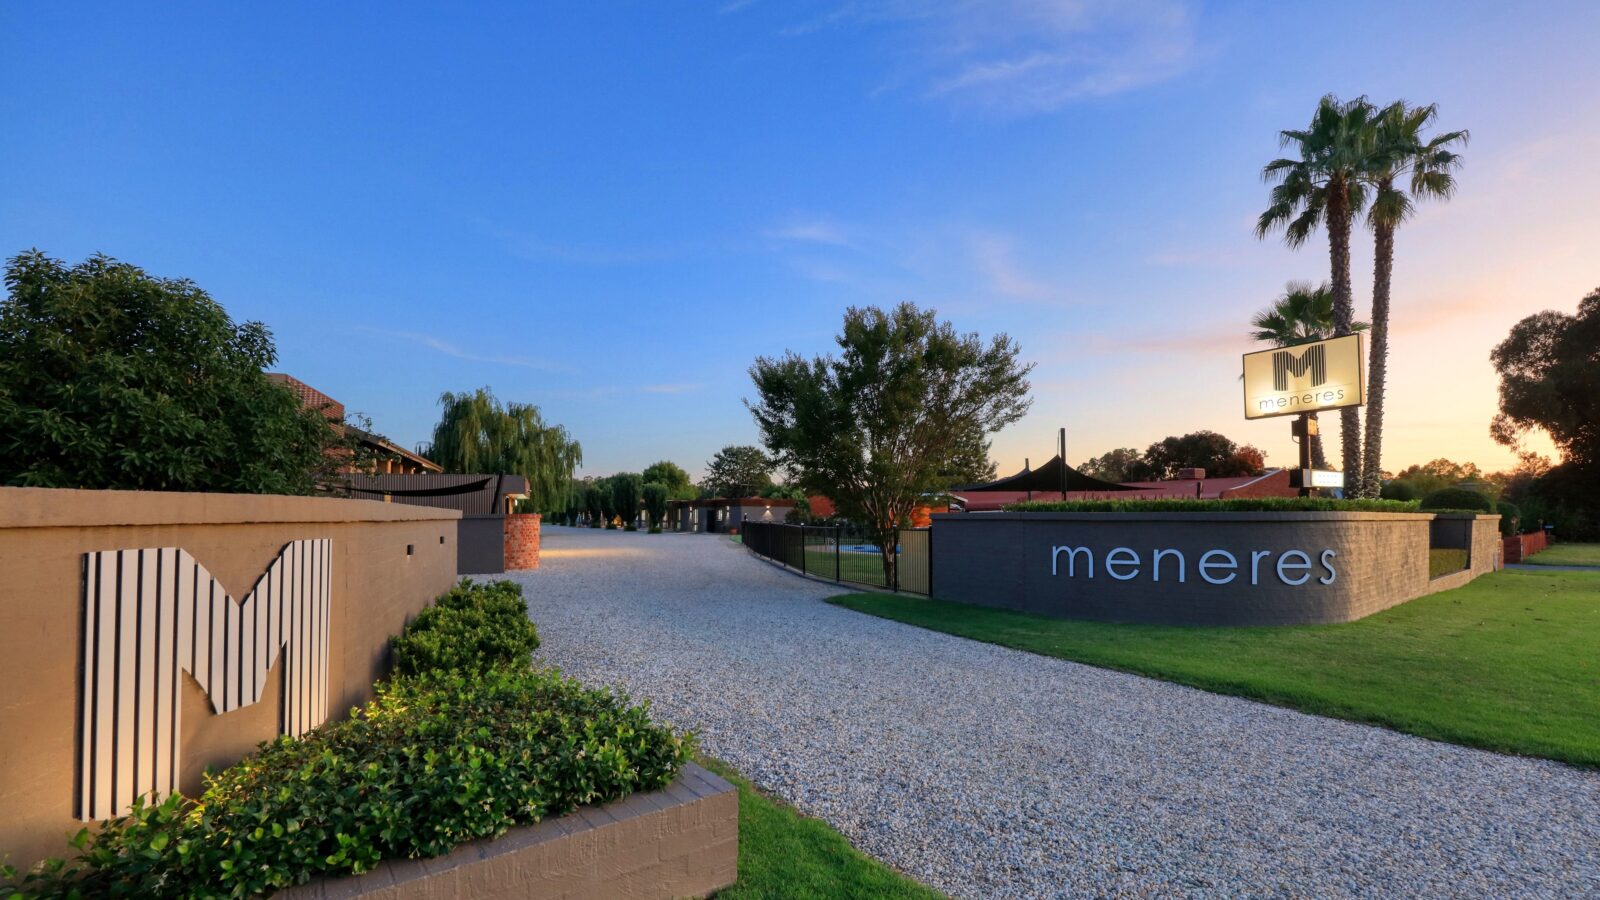 Motel Meneres front entrance at dusk showing rushed rock driveway with rendered brick entry.